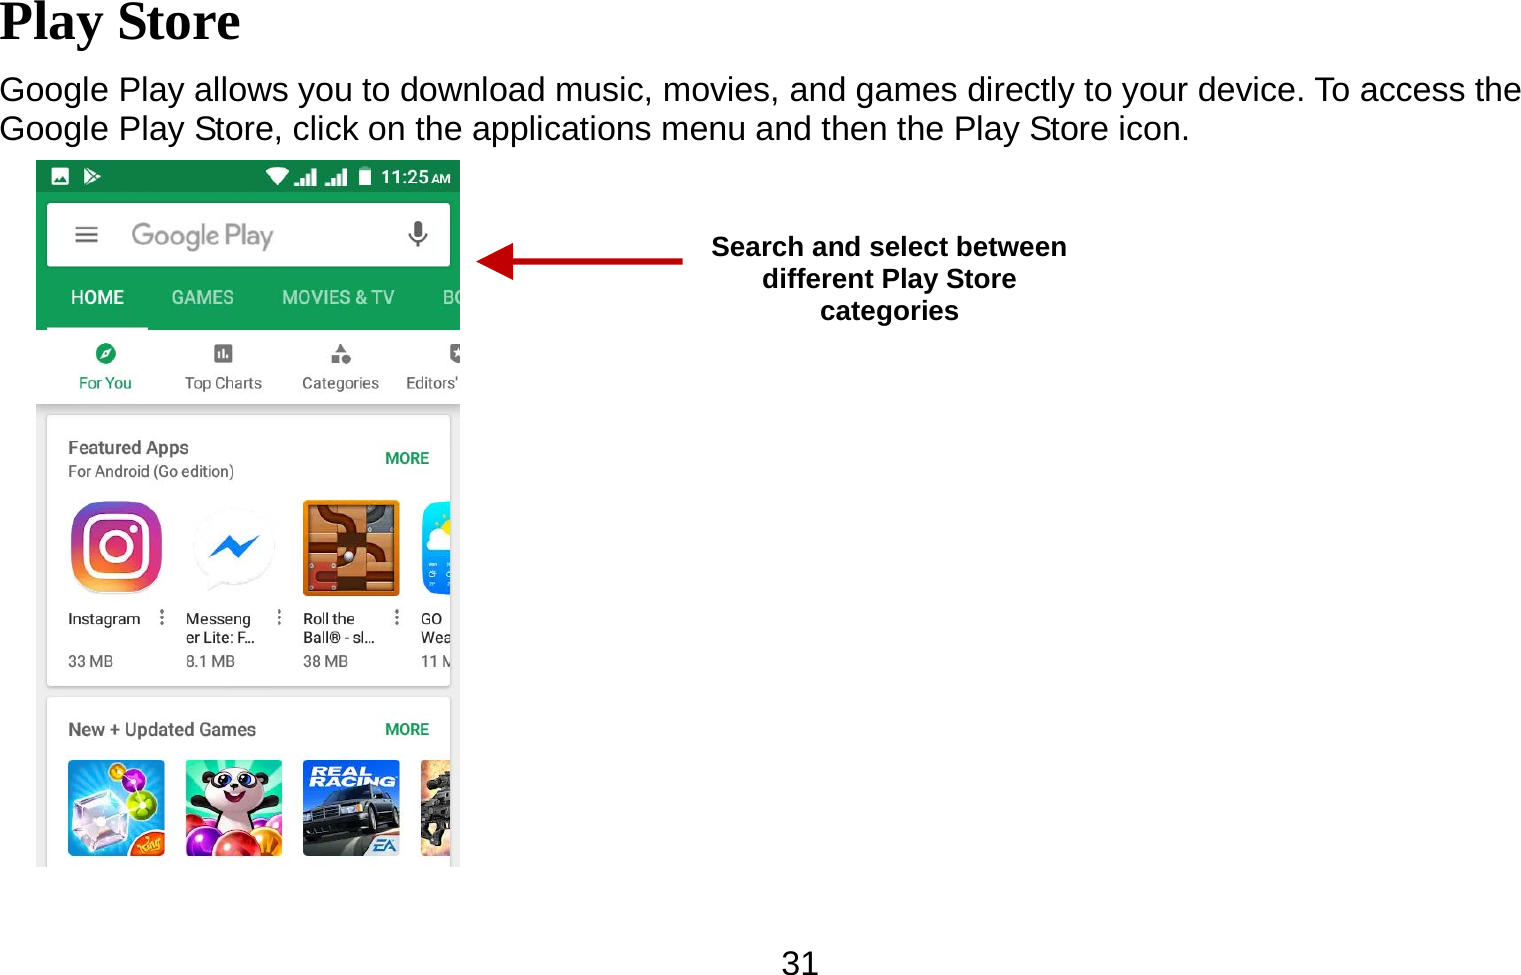   31Play Store Google Play allows you to download music, movies, and games directly to your device. To access the Google Play Store, click on the applications menu and then the Play Store icon.   Search and select between different Play Store categories 